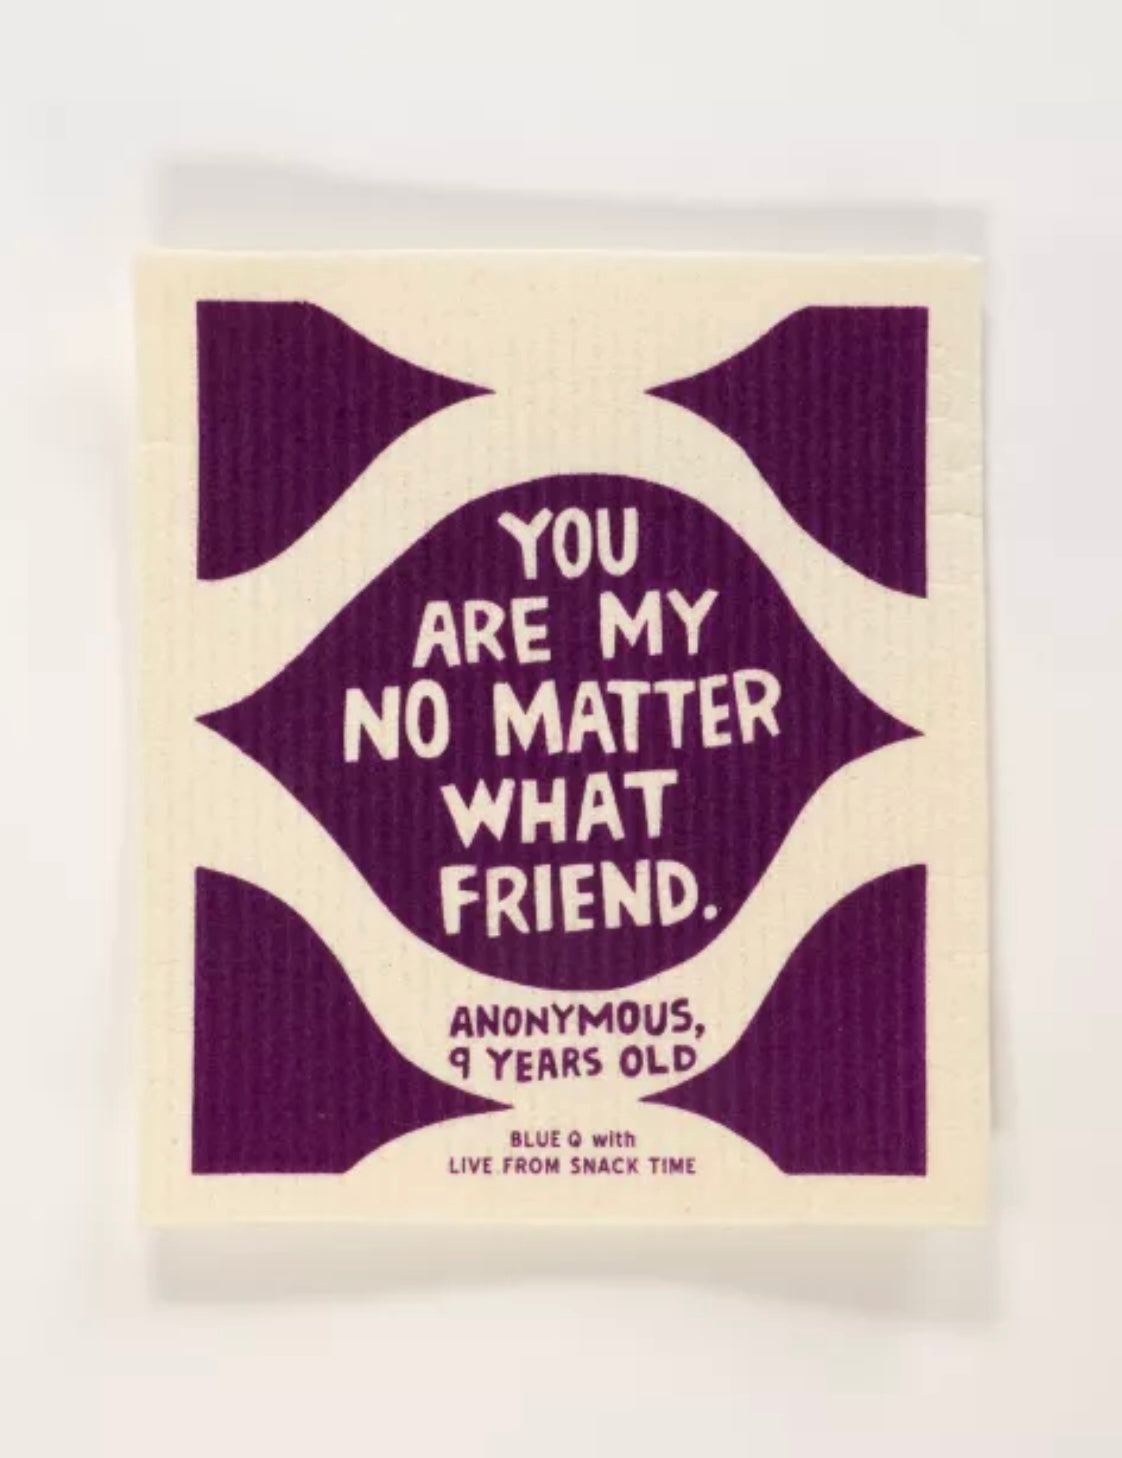 Blue Q You Are My No Matter What Friend Dishcloth